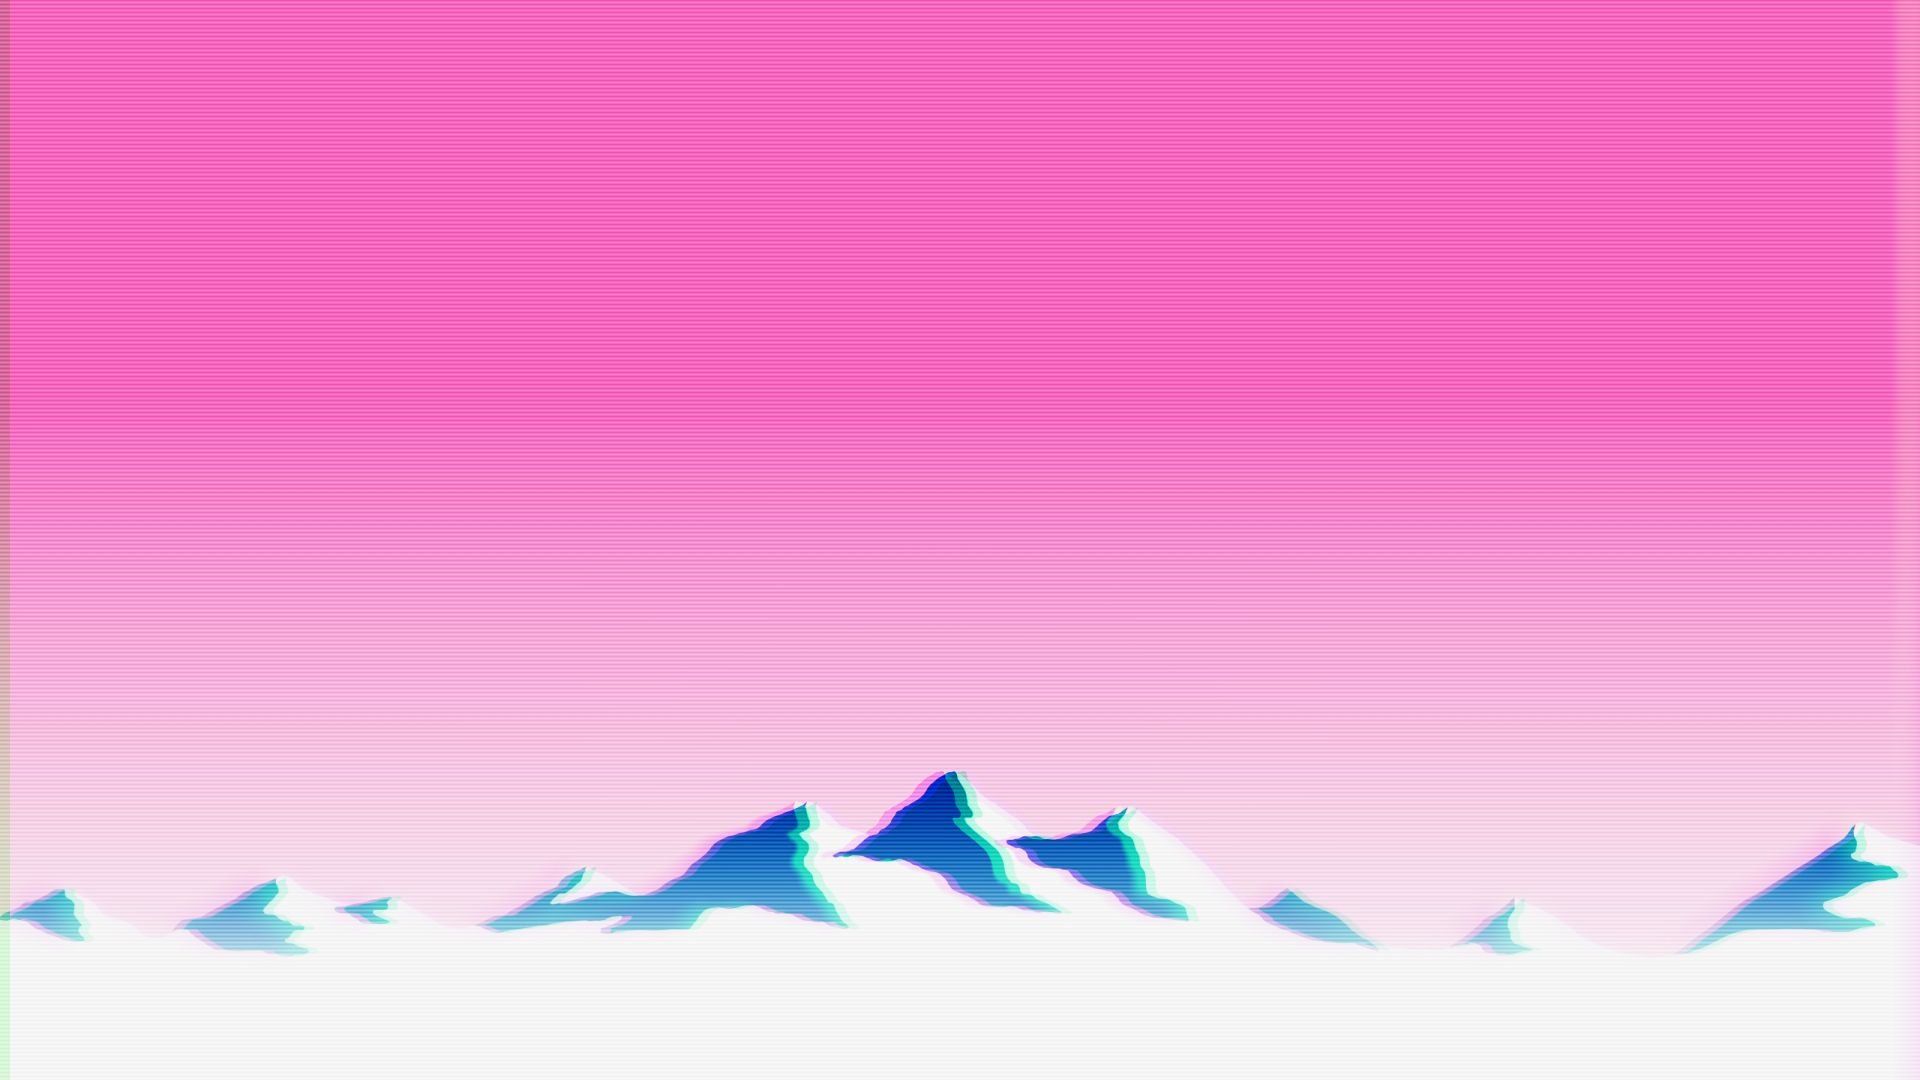 A pink and blue mountain landscape with snow - Vaporwave